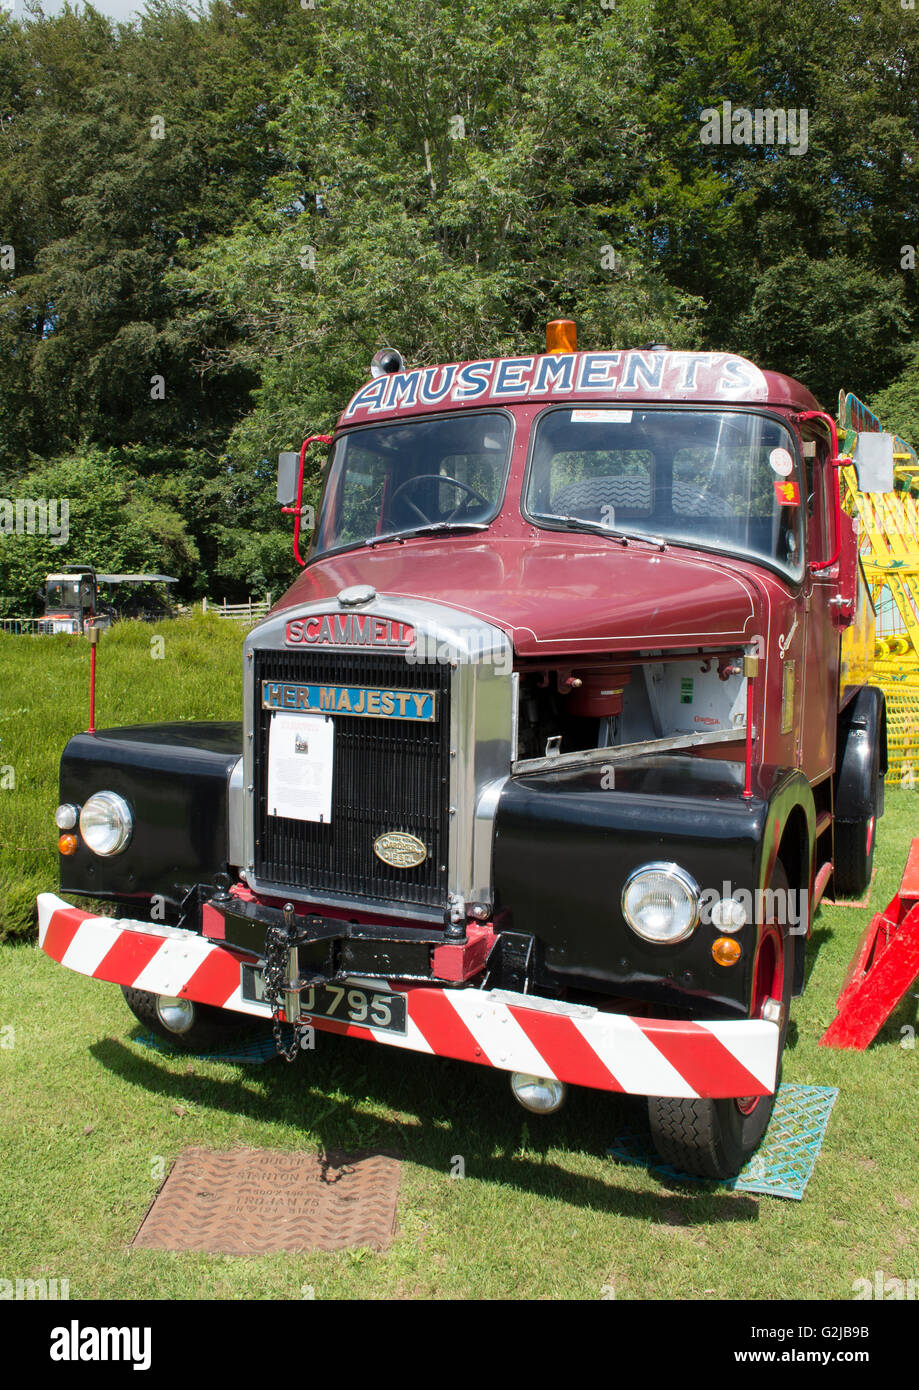 Front view of an old vintage red and black Scammell Heavy Haulage Truck on grass with trees in background Stock Photo